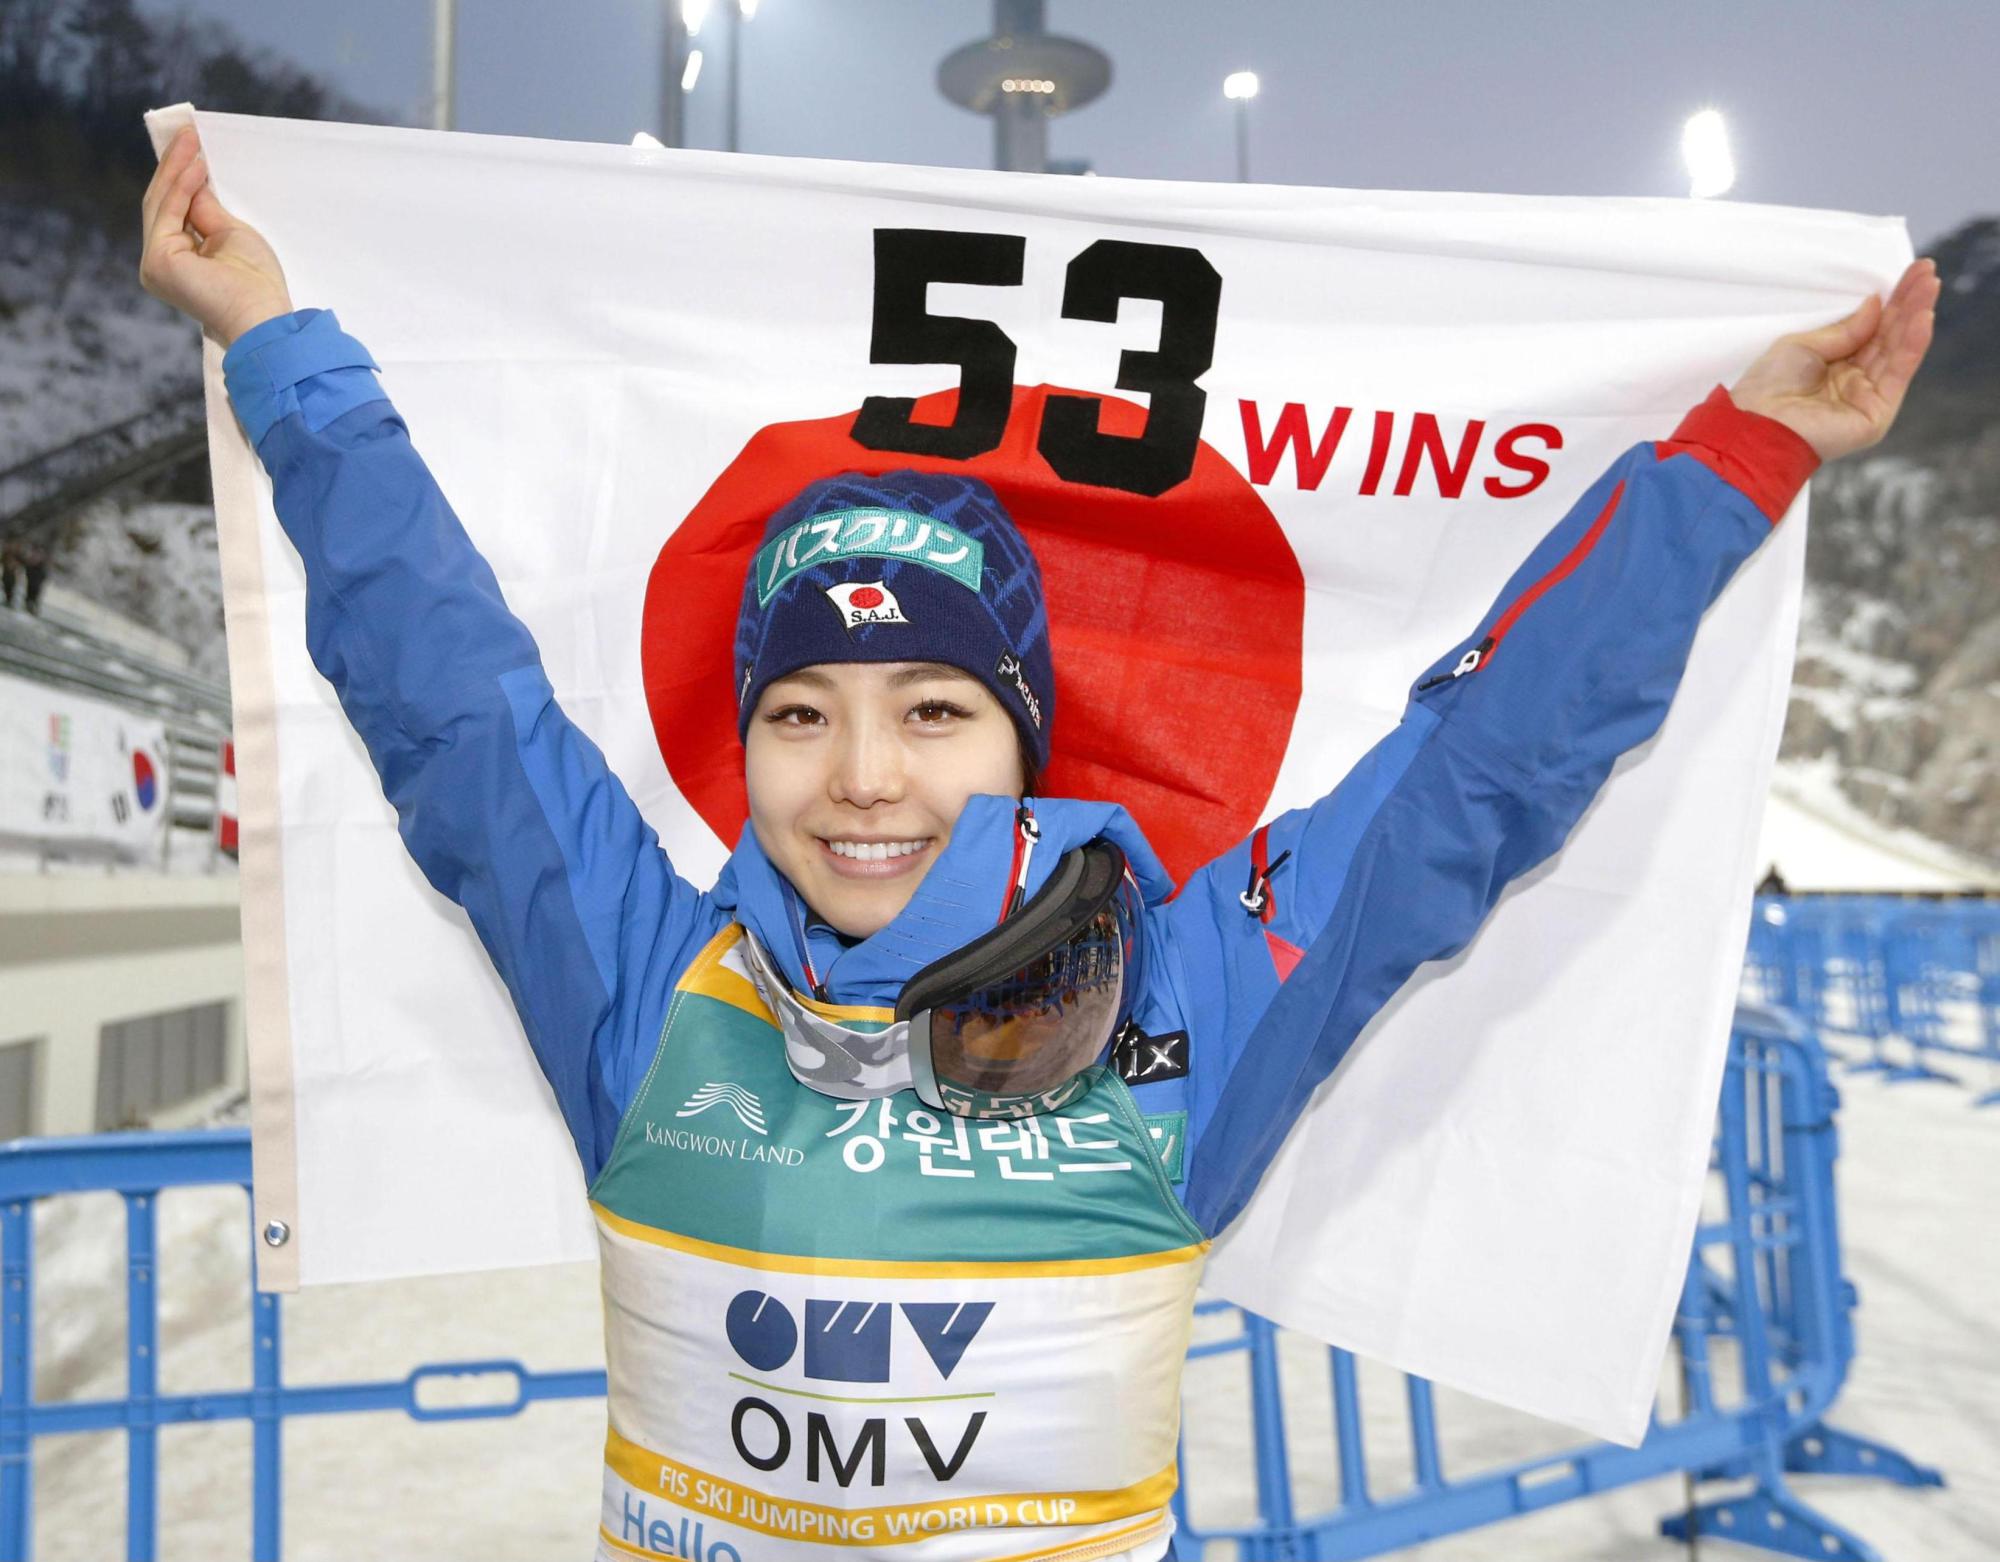 Ski Jumper Takanashi Ties All Time Mark Of 53 World Cup Victories within ski jumping korea for Household